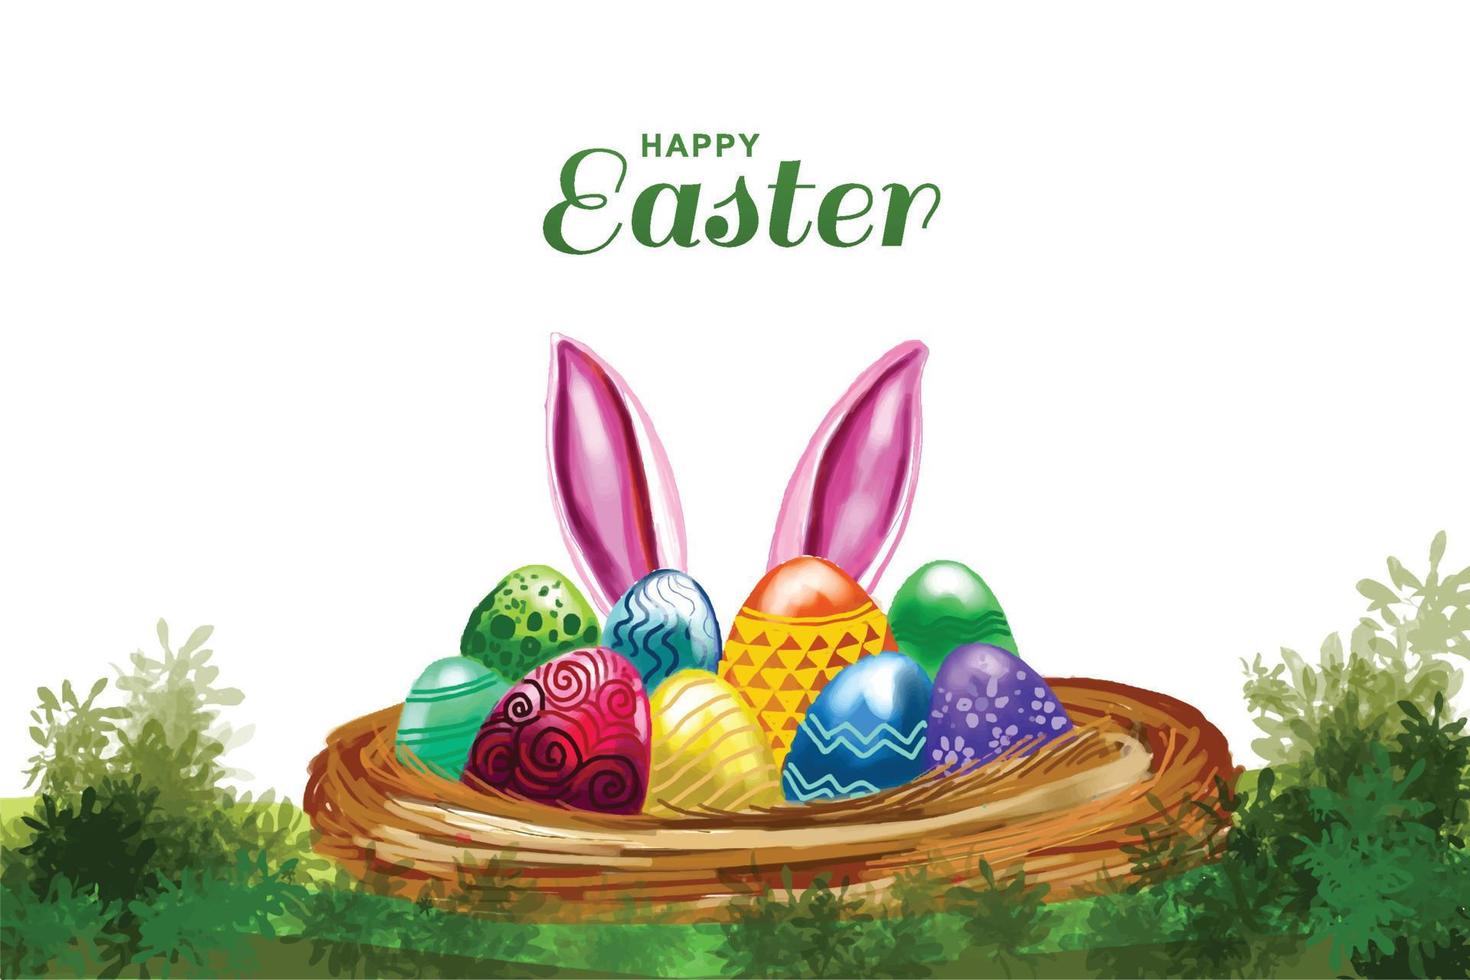 Happy easter holiday with painted egg with rabbit ears card design vector